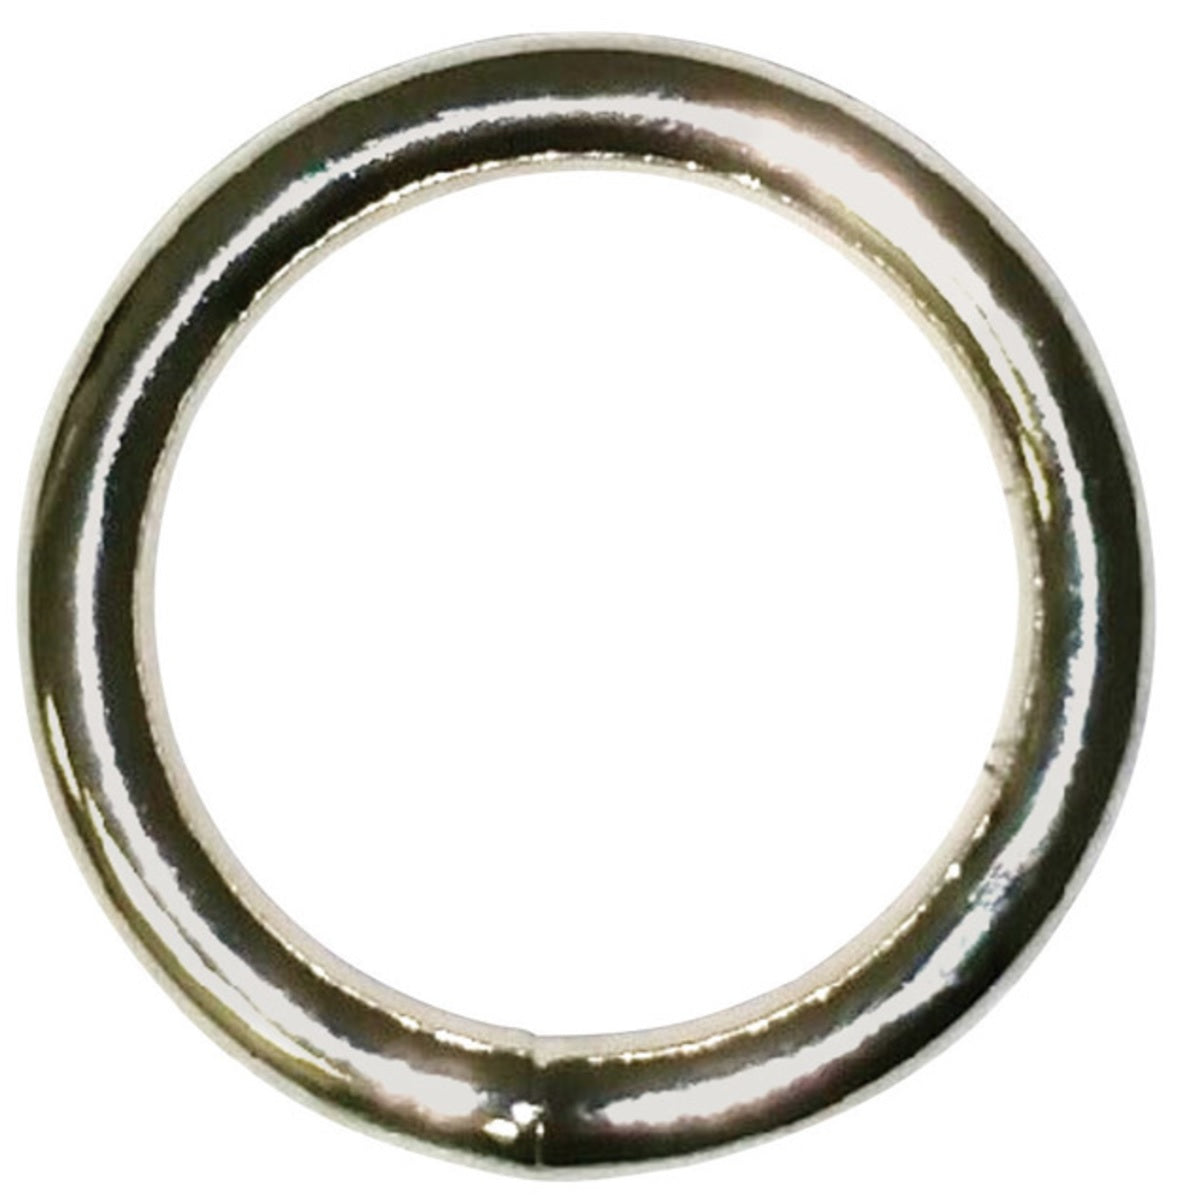 Baron 4-1-1/4 Round Weld Ring, Nickel Plated